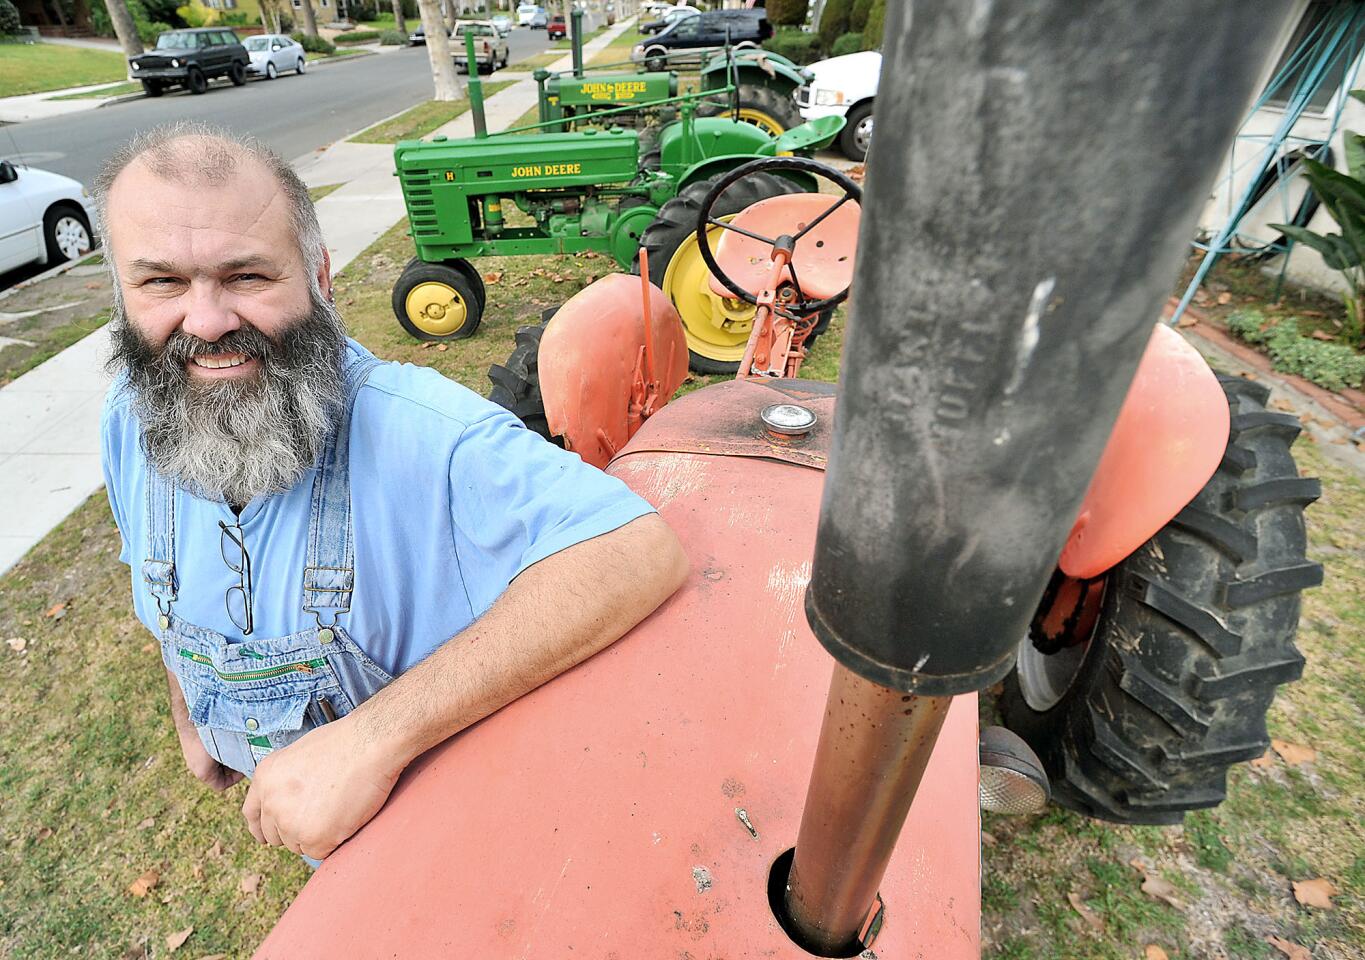 Burbank resident Dan Mustoe stands next to an Allis-Chalmers tractor that is one of three parked in his front yard on Mariposa Street for passersby to enjoy.